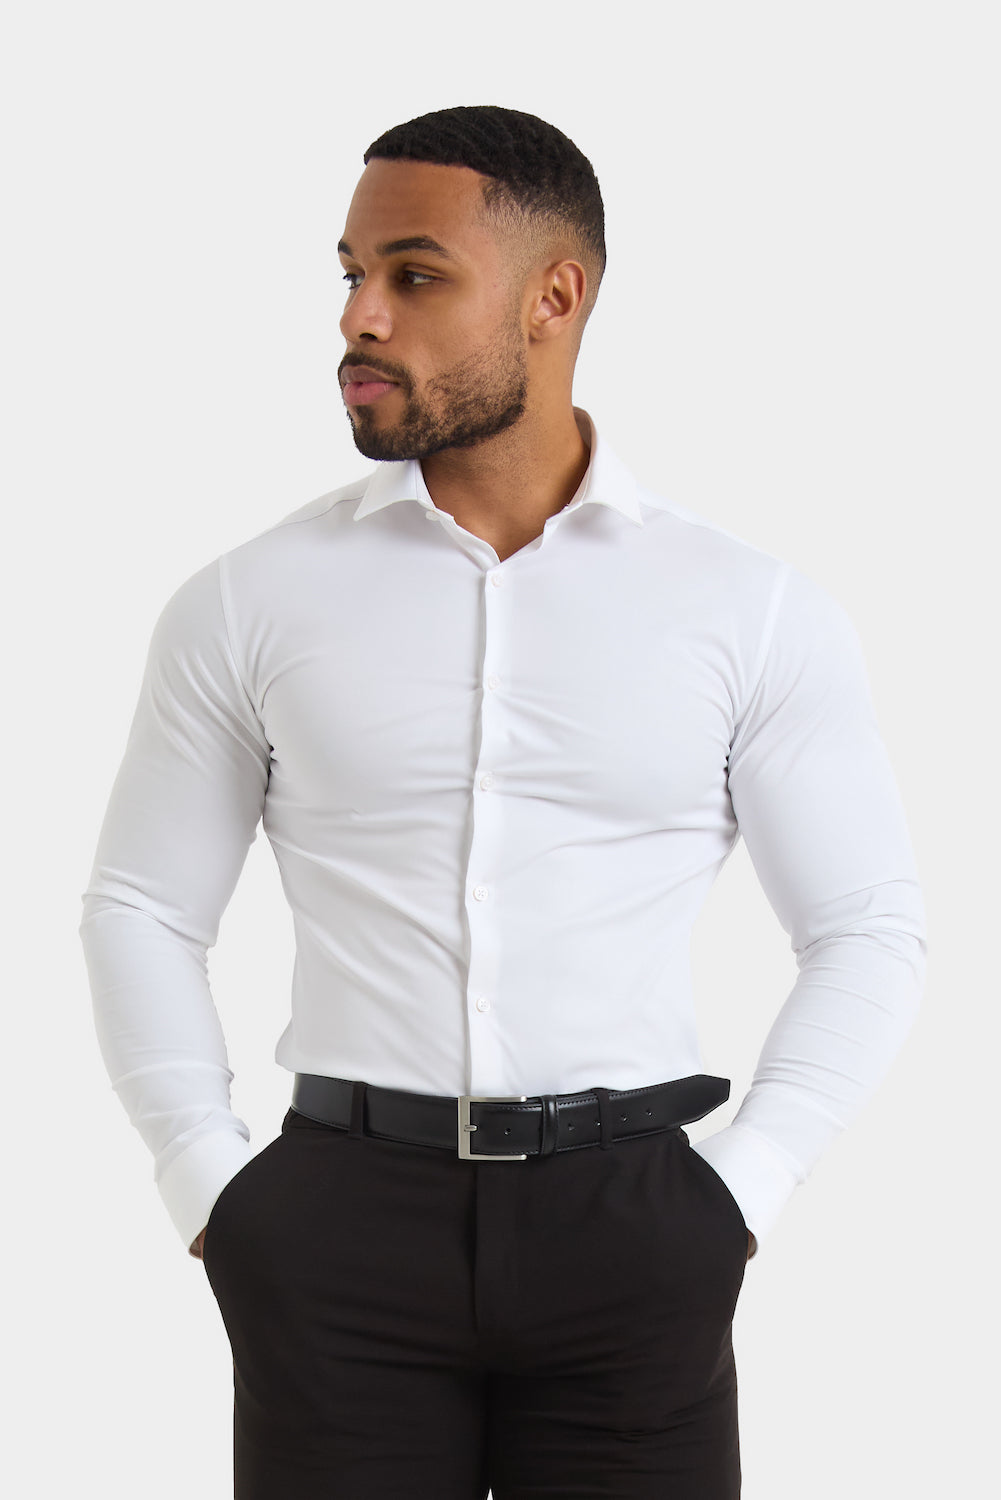 Muscle Fit Dress Shirt 4-Pack - TAILORED ATHLETE - ROW